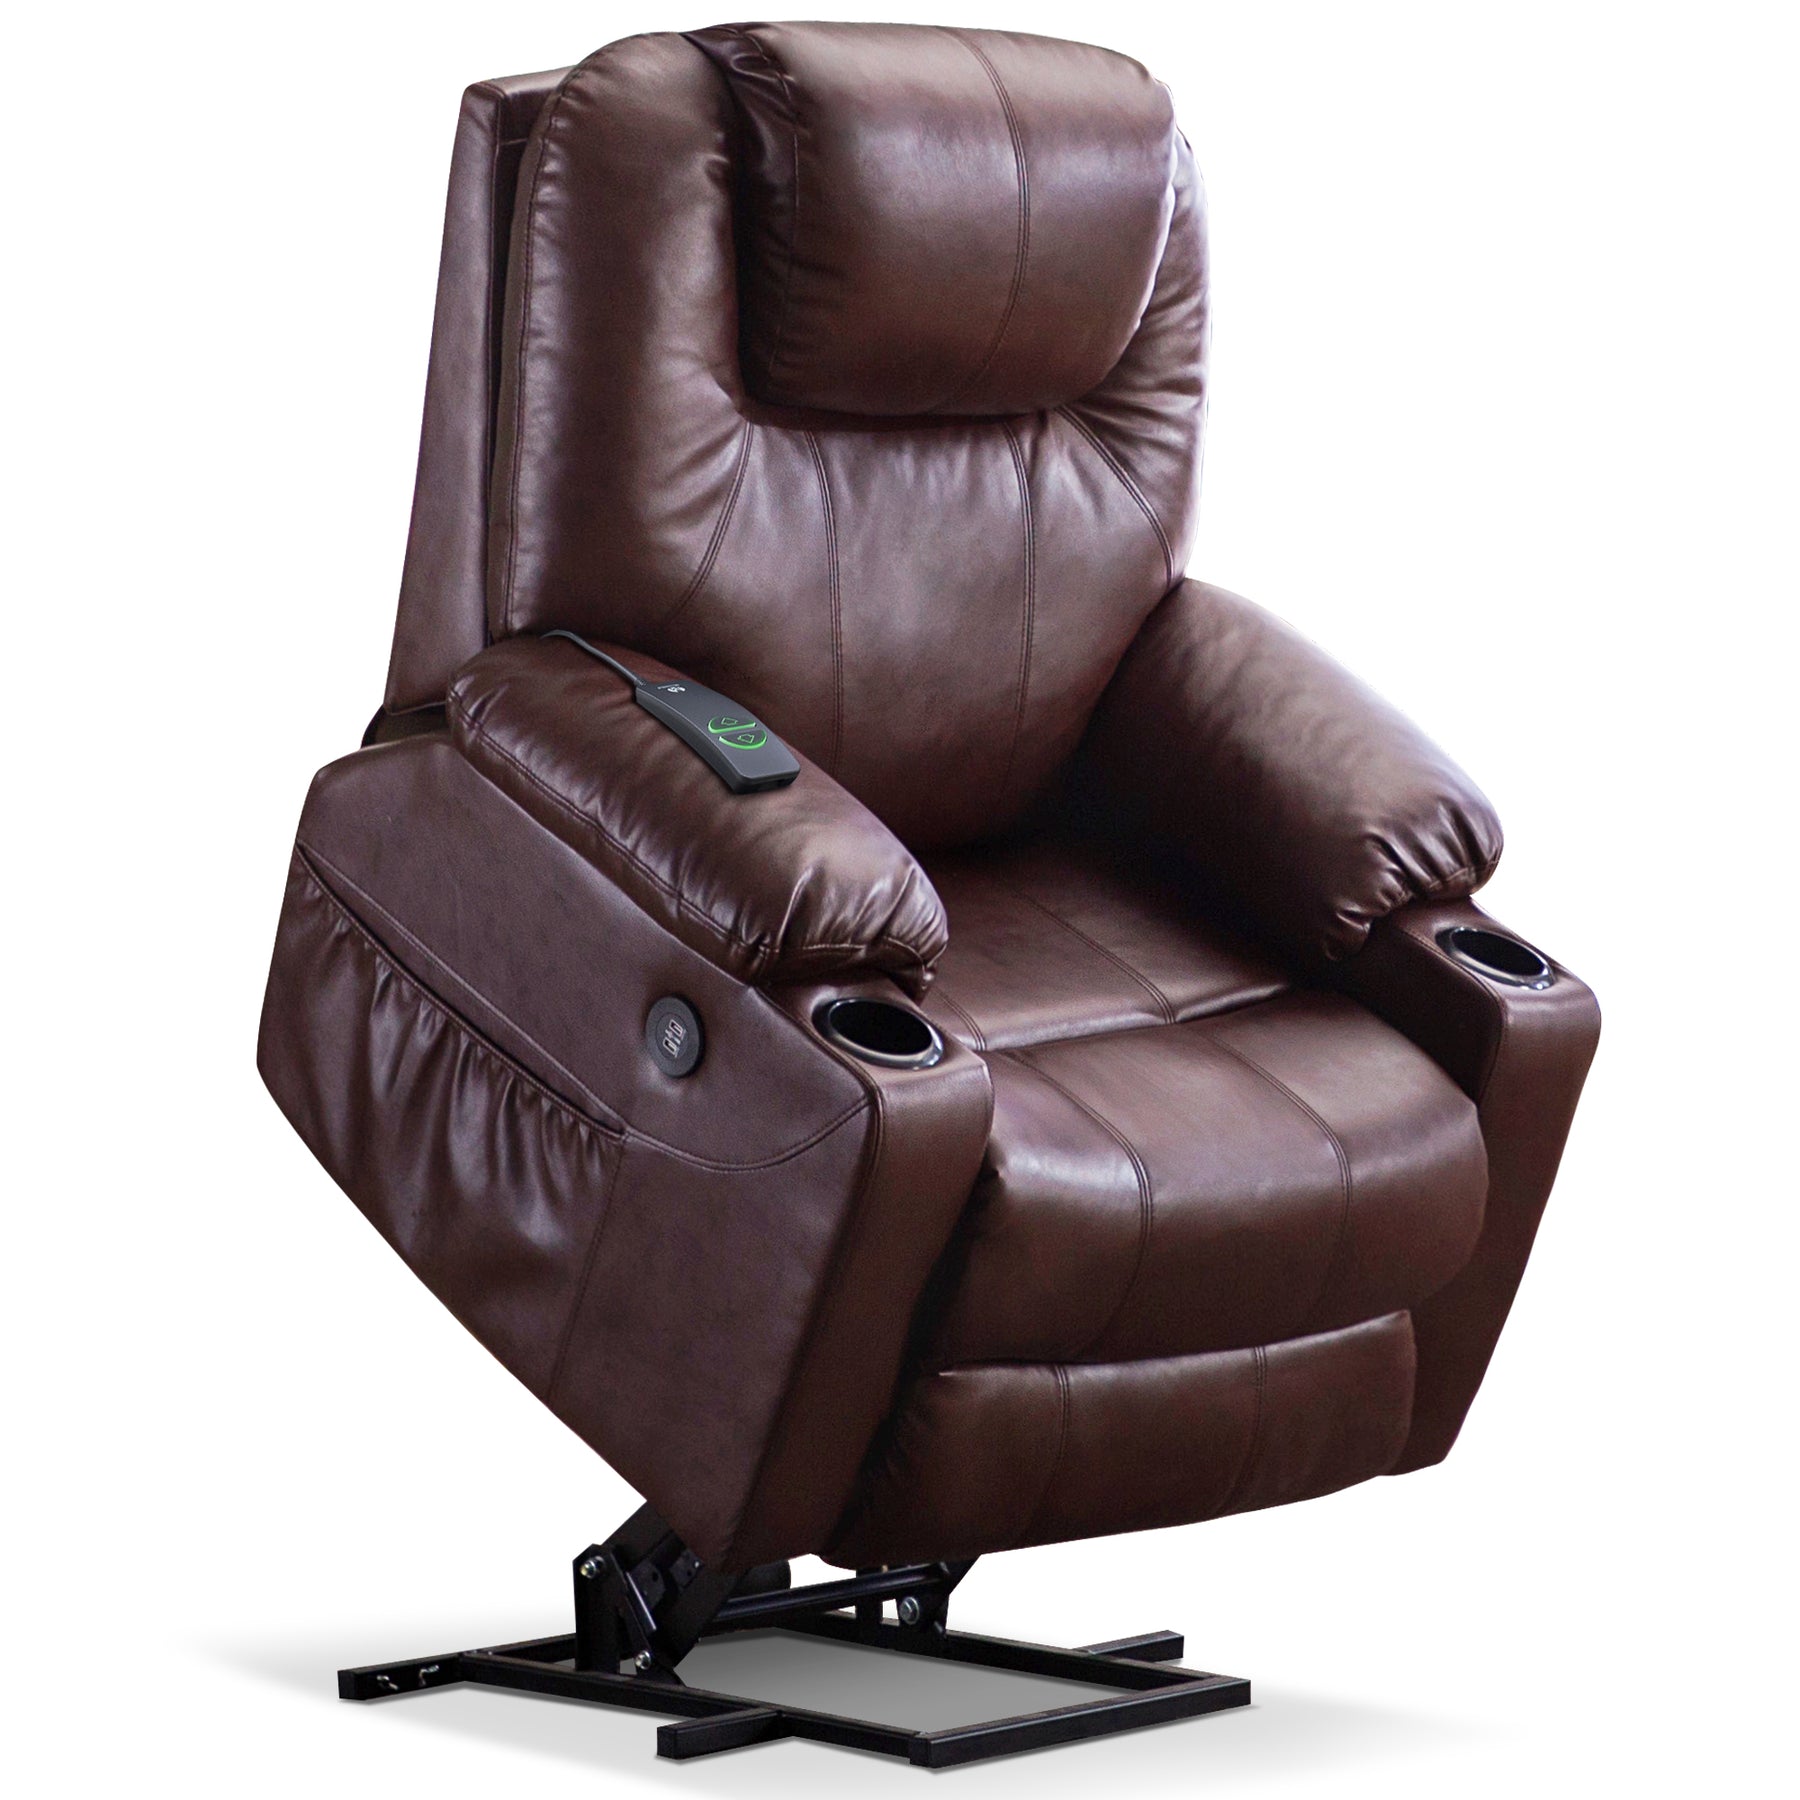 Set of Two Wood-Framed PU Leather Recliner Chair Adjustable Home Theater  Seating with Thick Seat Cushion and Backrest Modern Living Room Recliners,  Brown 